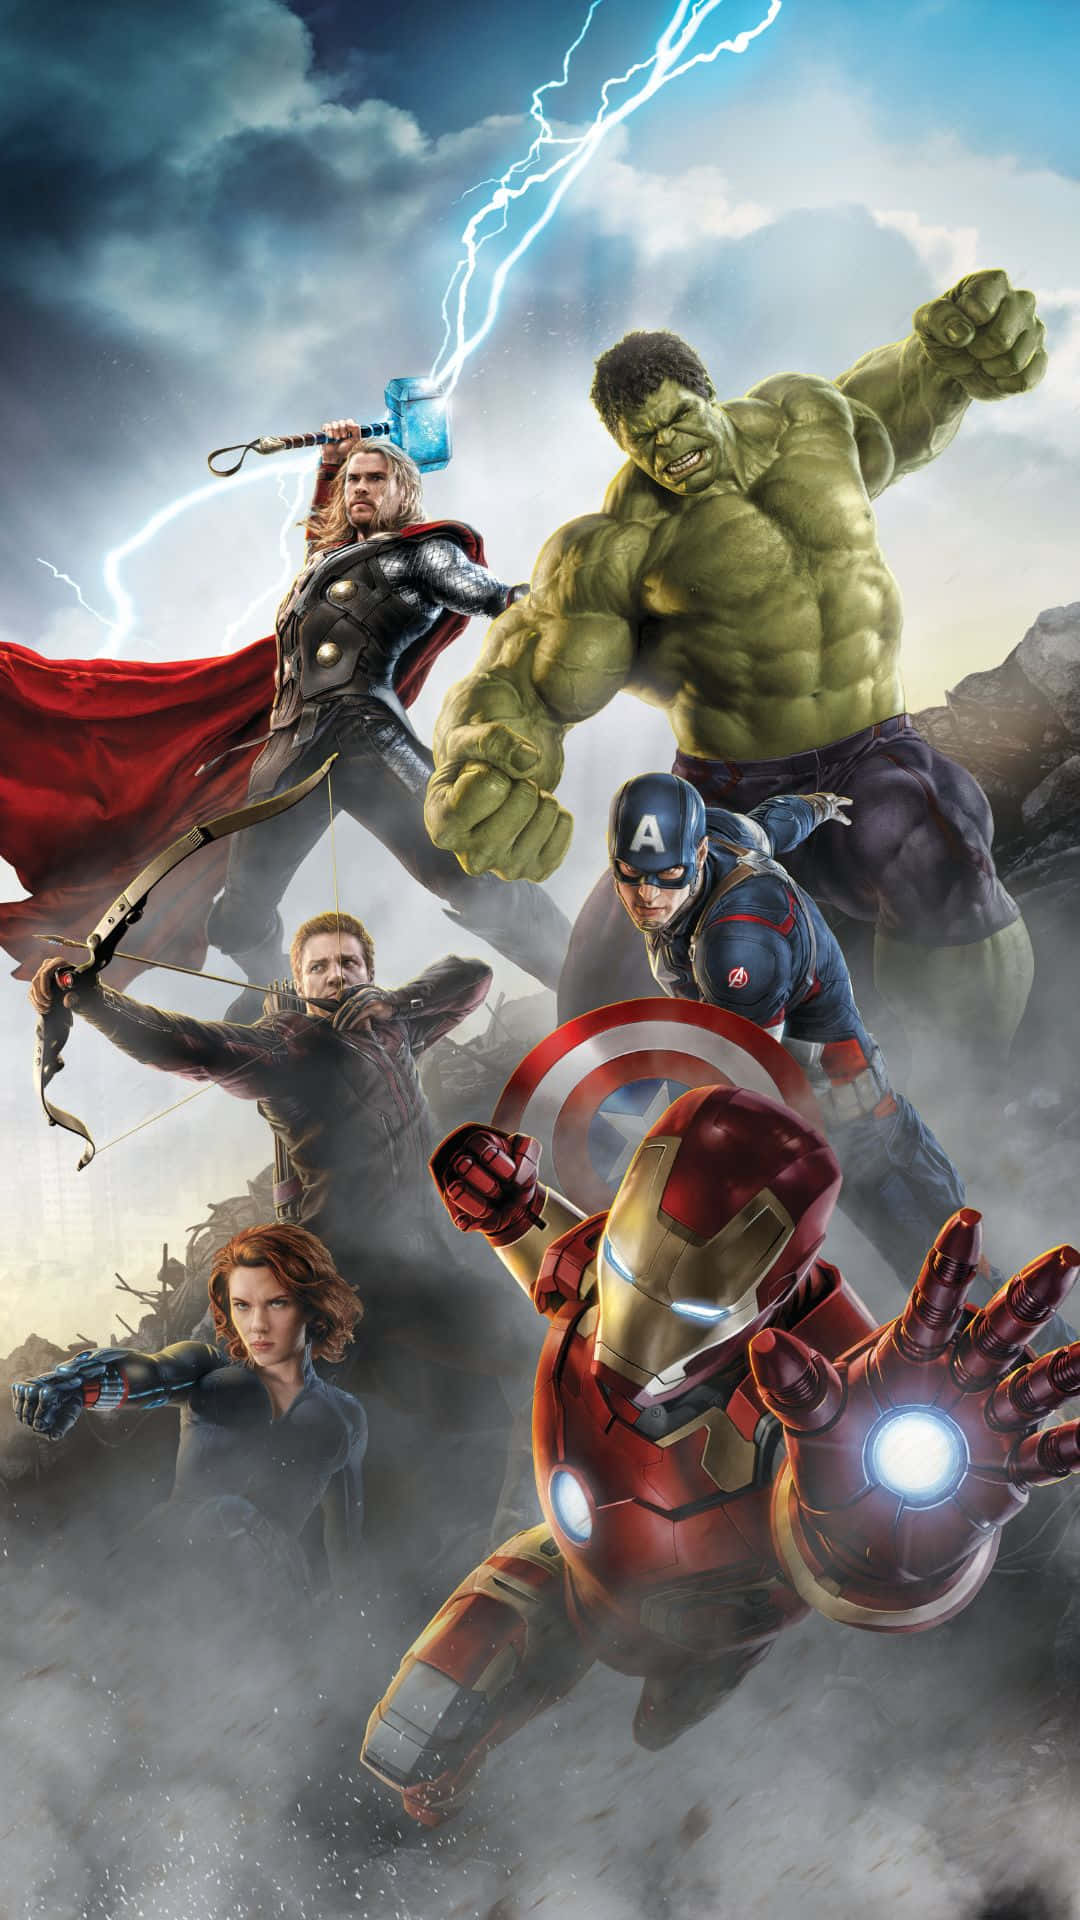 Android Marvel's Avengers Poster Avengers Smoky Backdrop Background